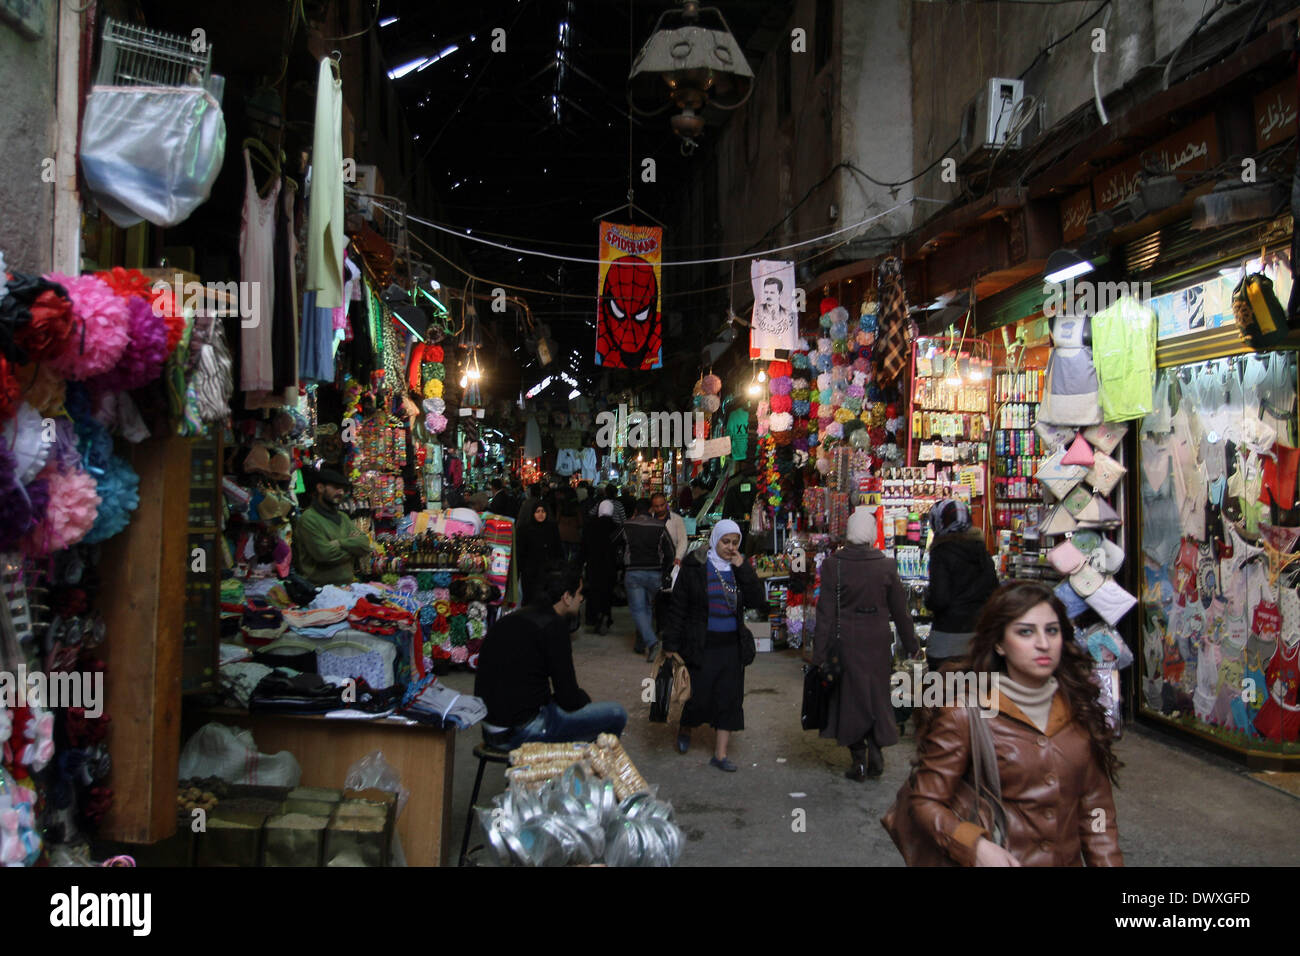 Damascus, Syria. 13th Mar, 2014. People walk in al-Hamidiyah Souk, one of the largest marketplaces in Syria, in the old city of Damascus, Syria, March 13, 2014. Despite the crunching crisis in Syria, which is entering its fourth year, and the economic hardship that ensued, Syrians in the capital Damascus haven't abandoned their popular markets even though most of them have become window shoppers as their purchasing capabilities have dramatically dropped due to the depreciation of the Syrian pound, the high unemployment rates and the western sanctions. © Bassem Tellawi/Xinhua/Alamy Live News Stock Photo